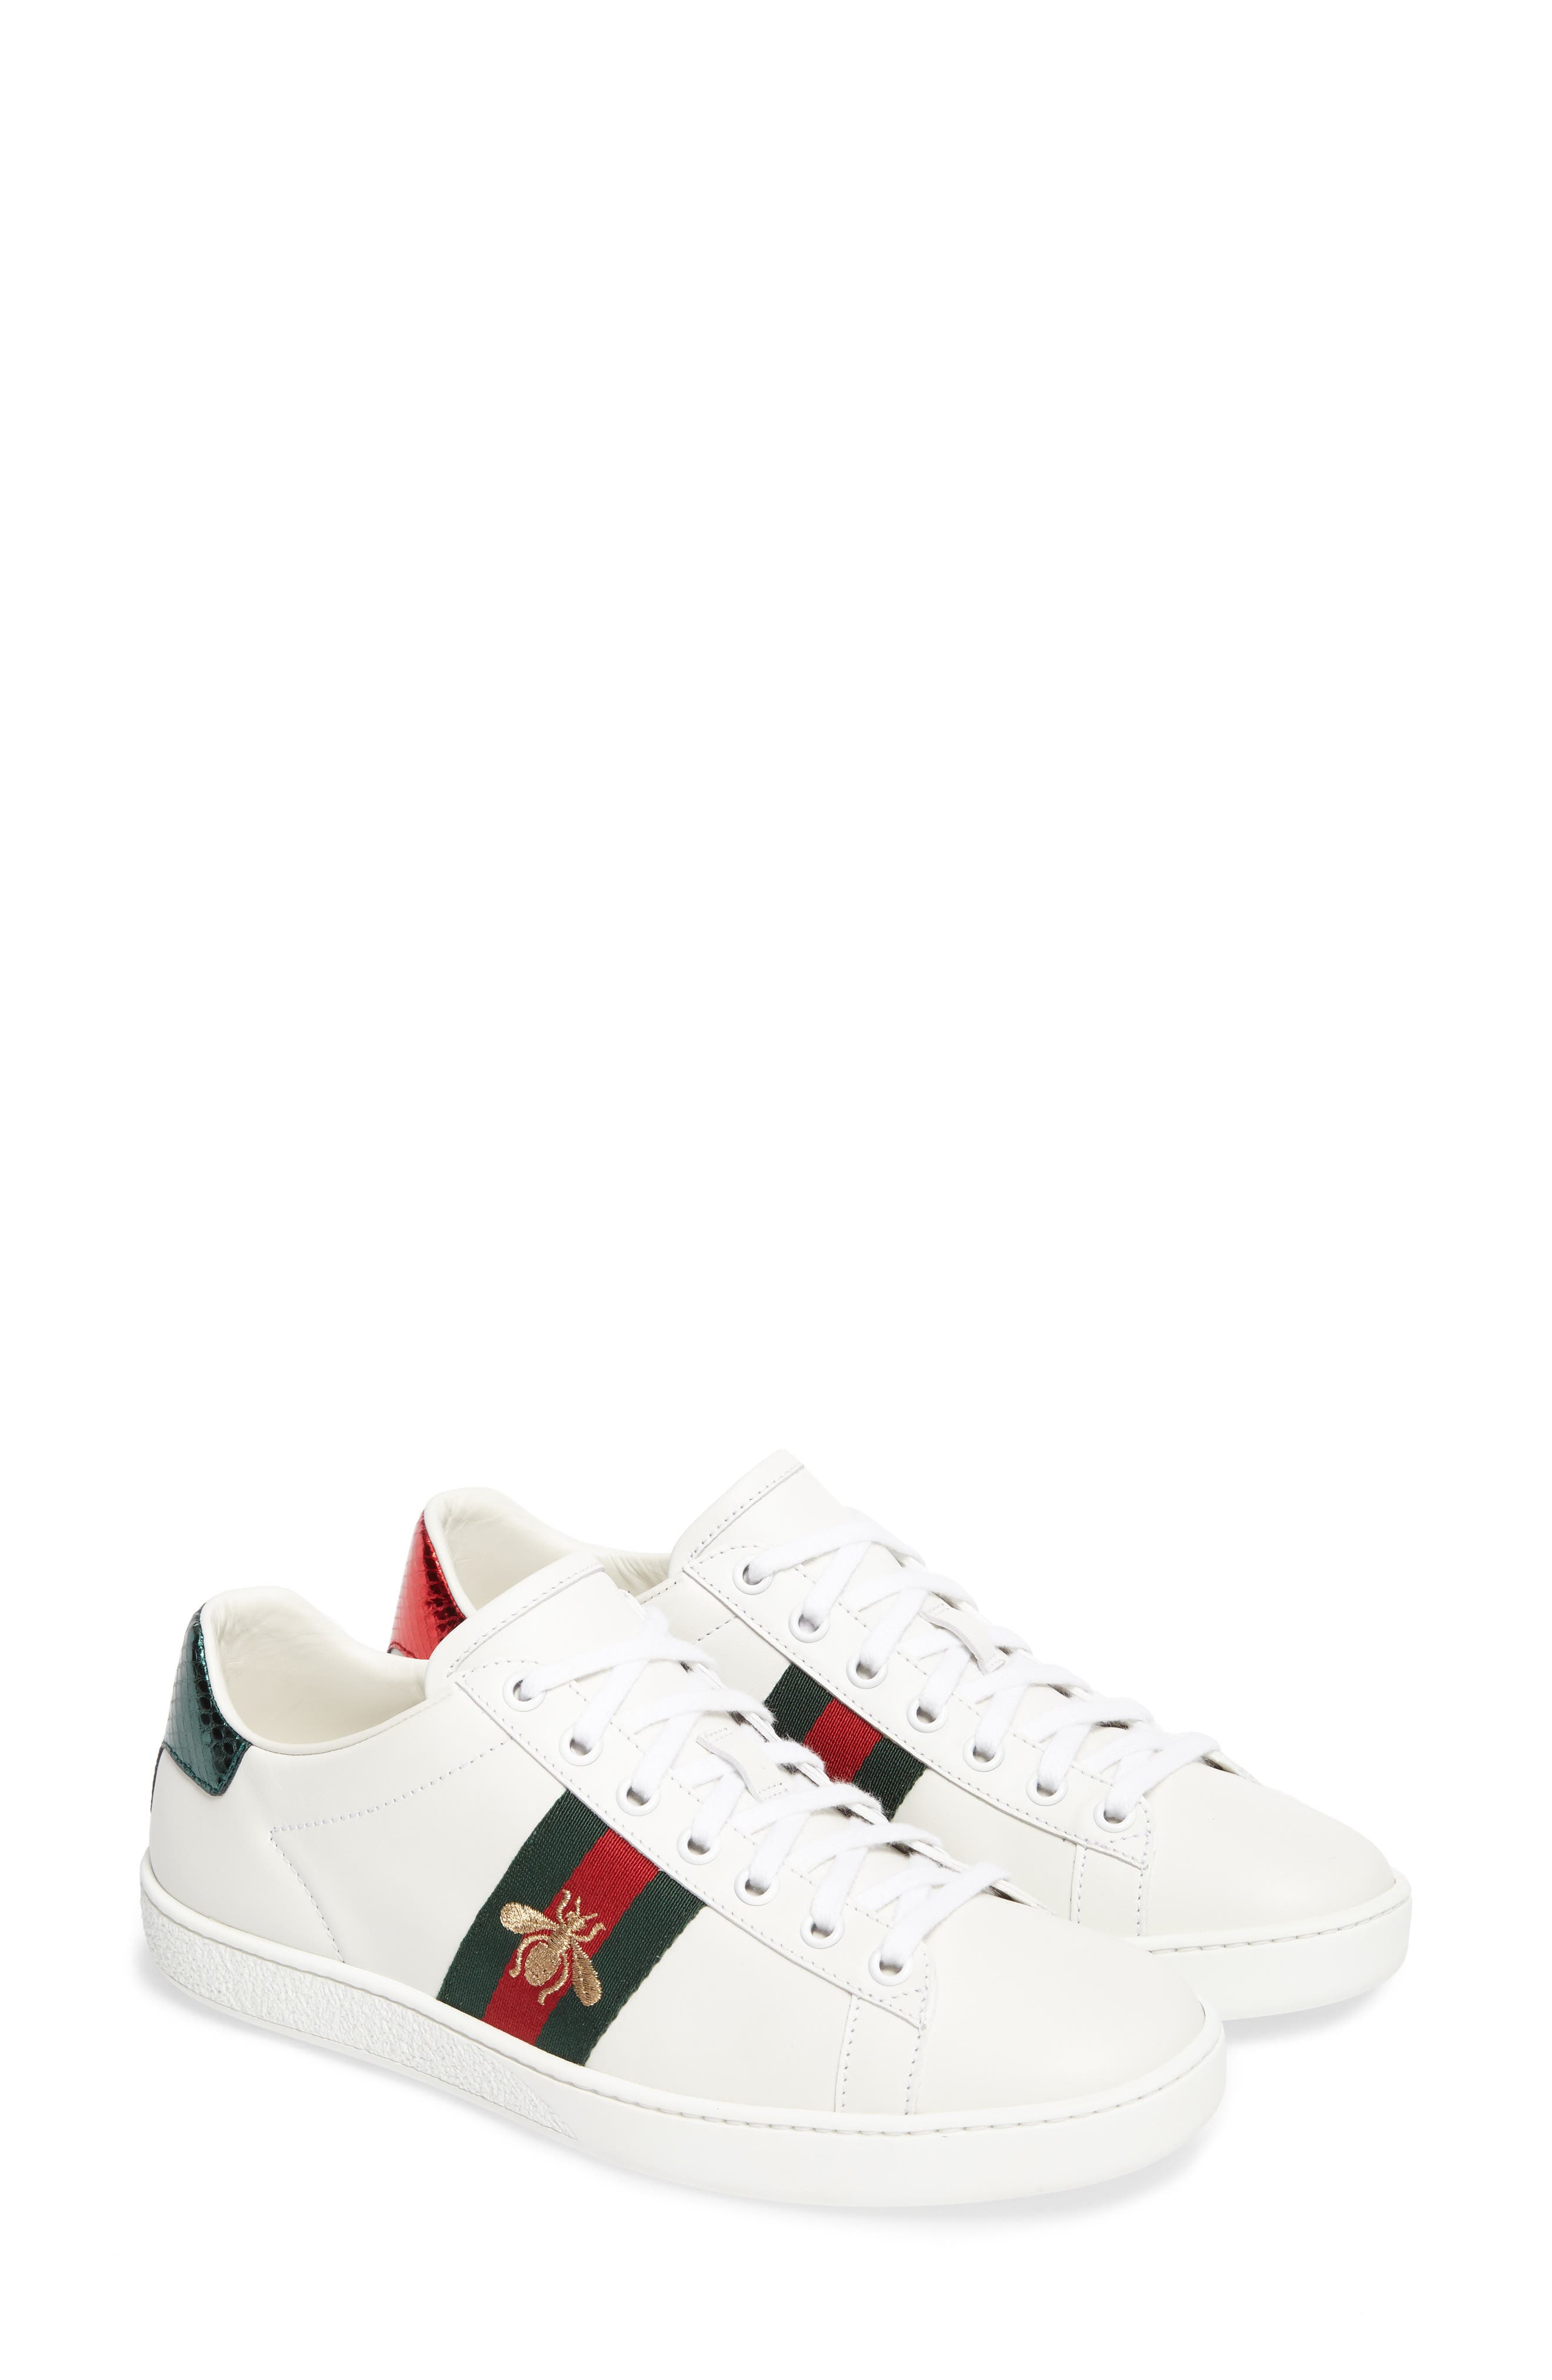 gucci shoes us price